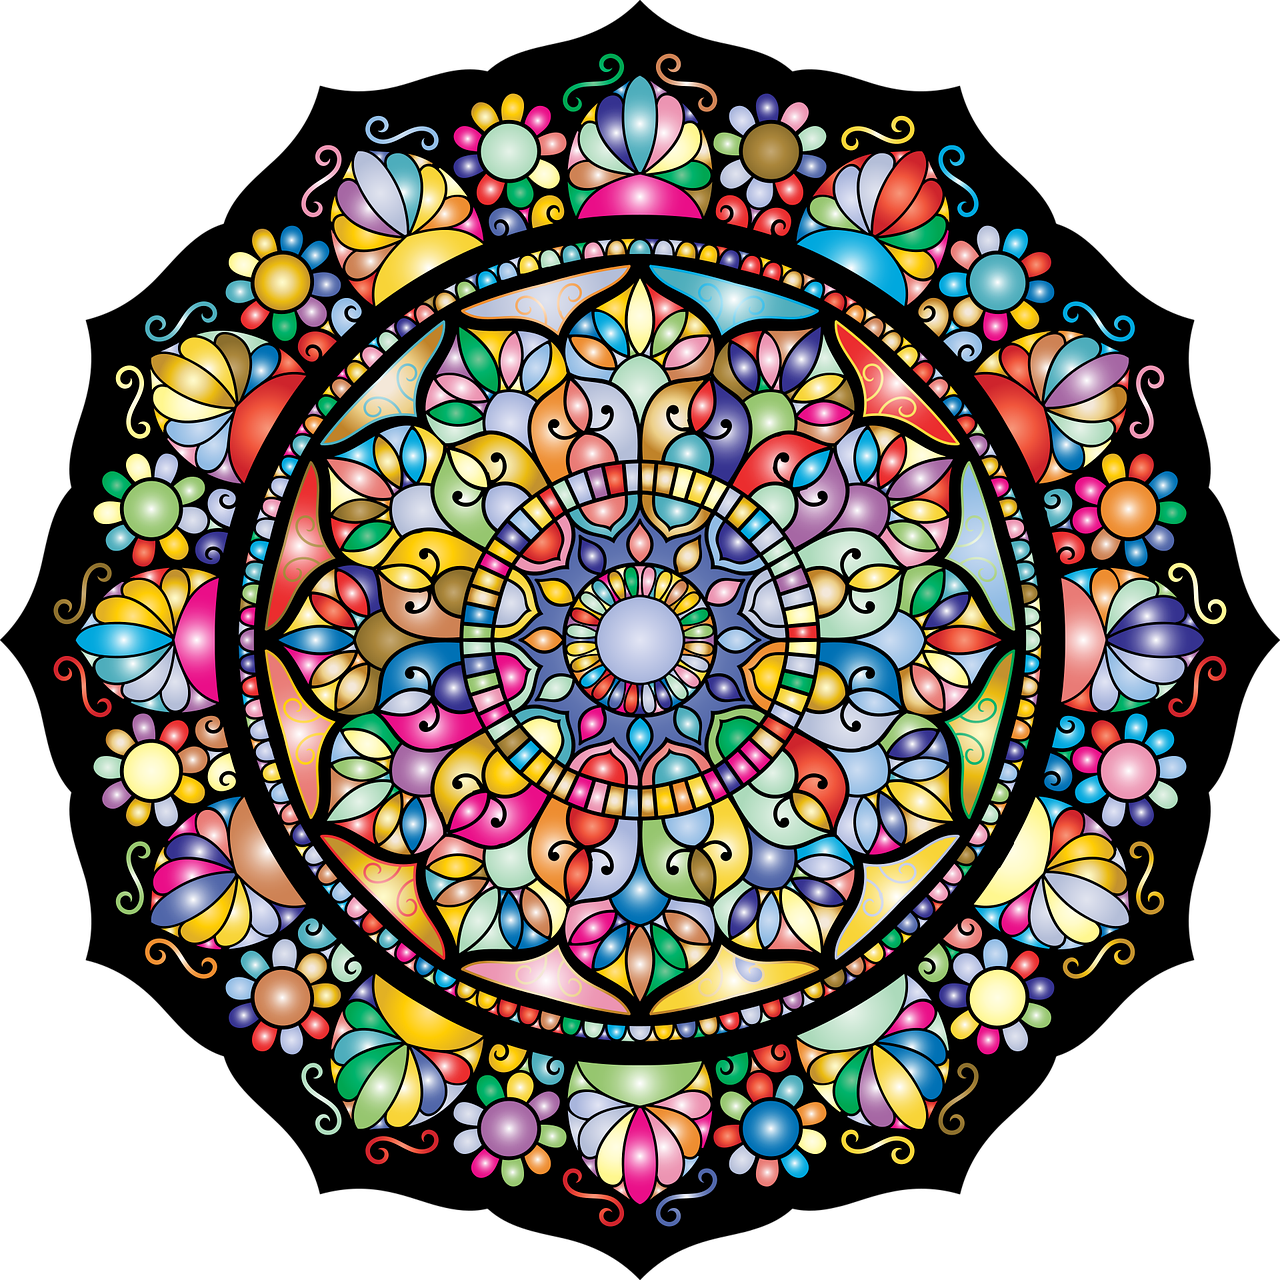 a colorful circular design on a black background, by Joe Mangrum, colored illustration for tattoo, ornate painting, lowres, stained glass style